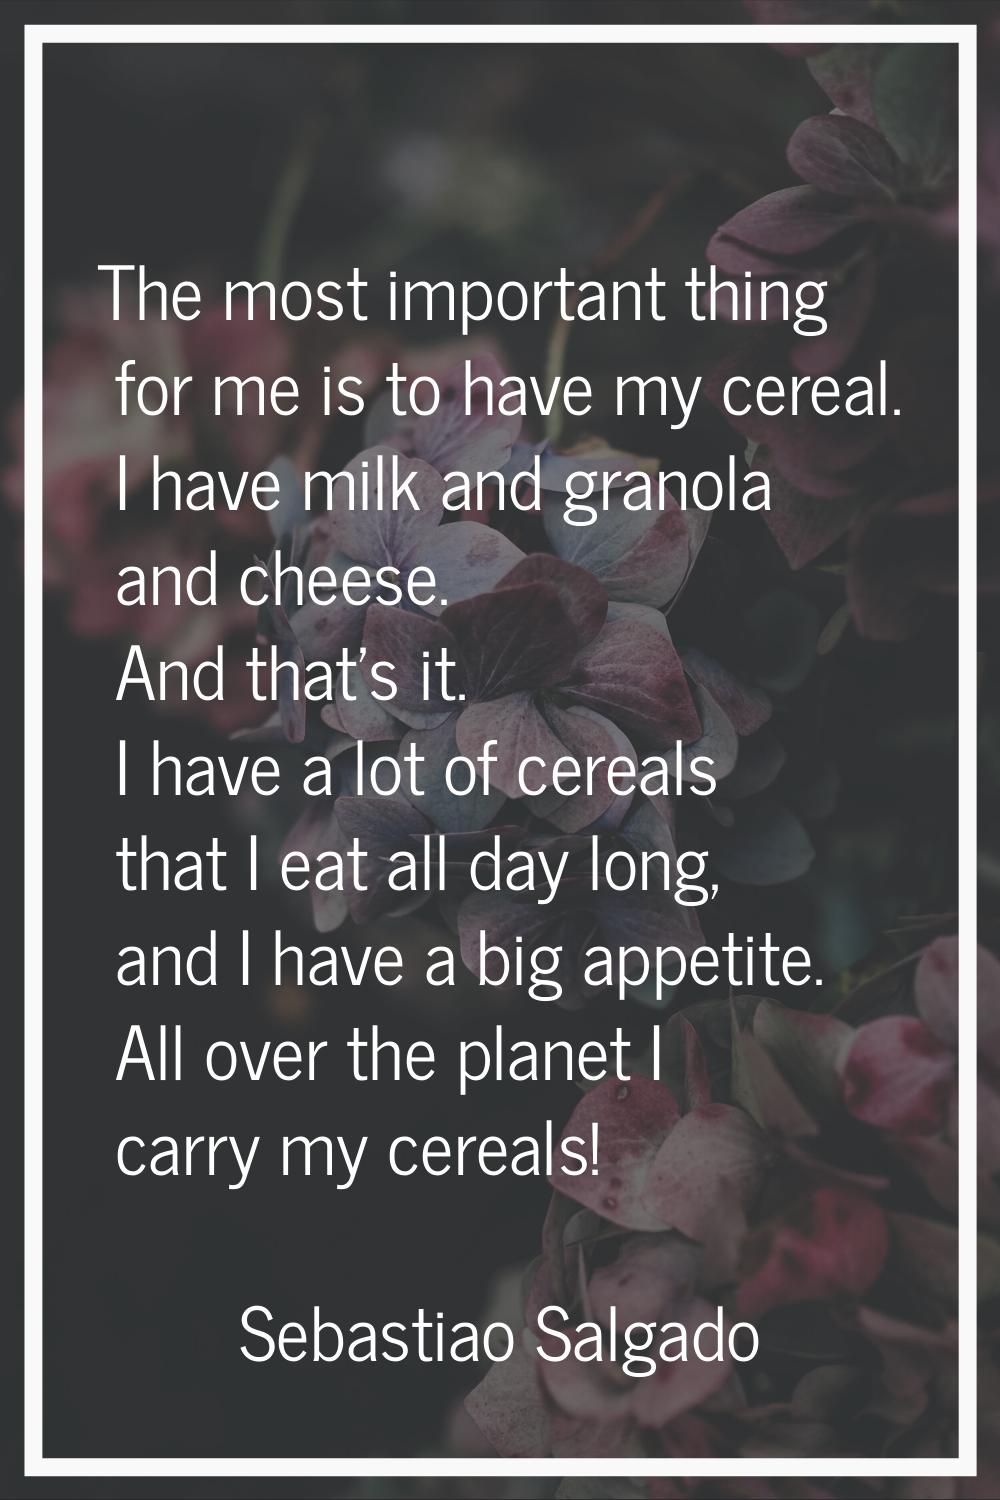 The most important thing for me is to have my cereal. I have milk and granola and cheese. And that'